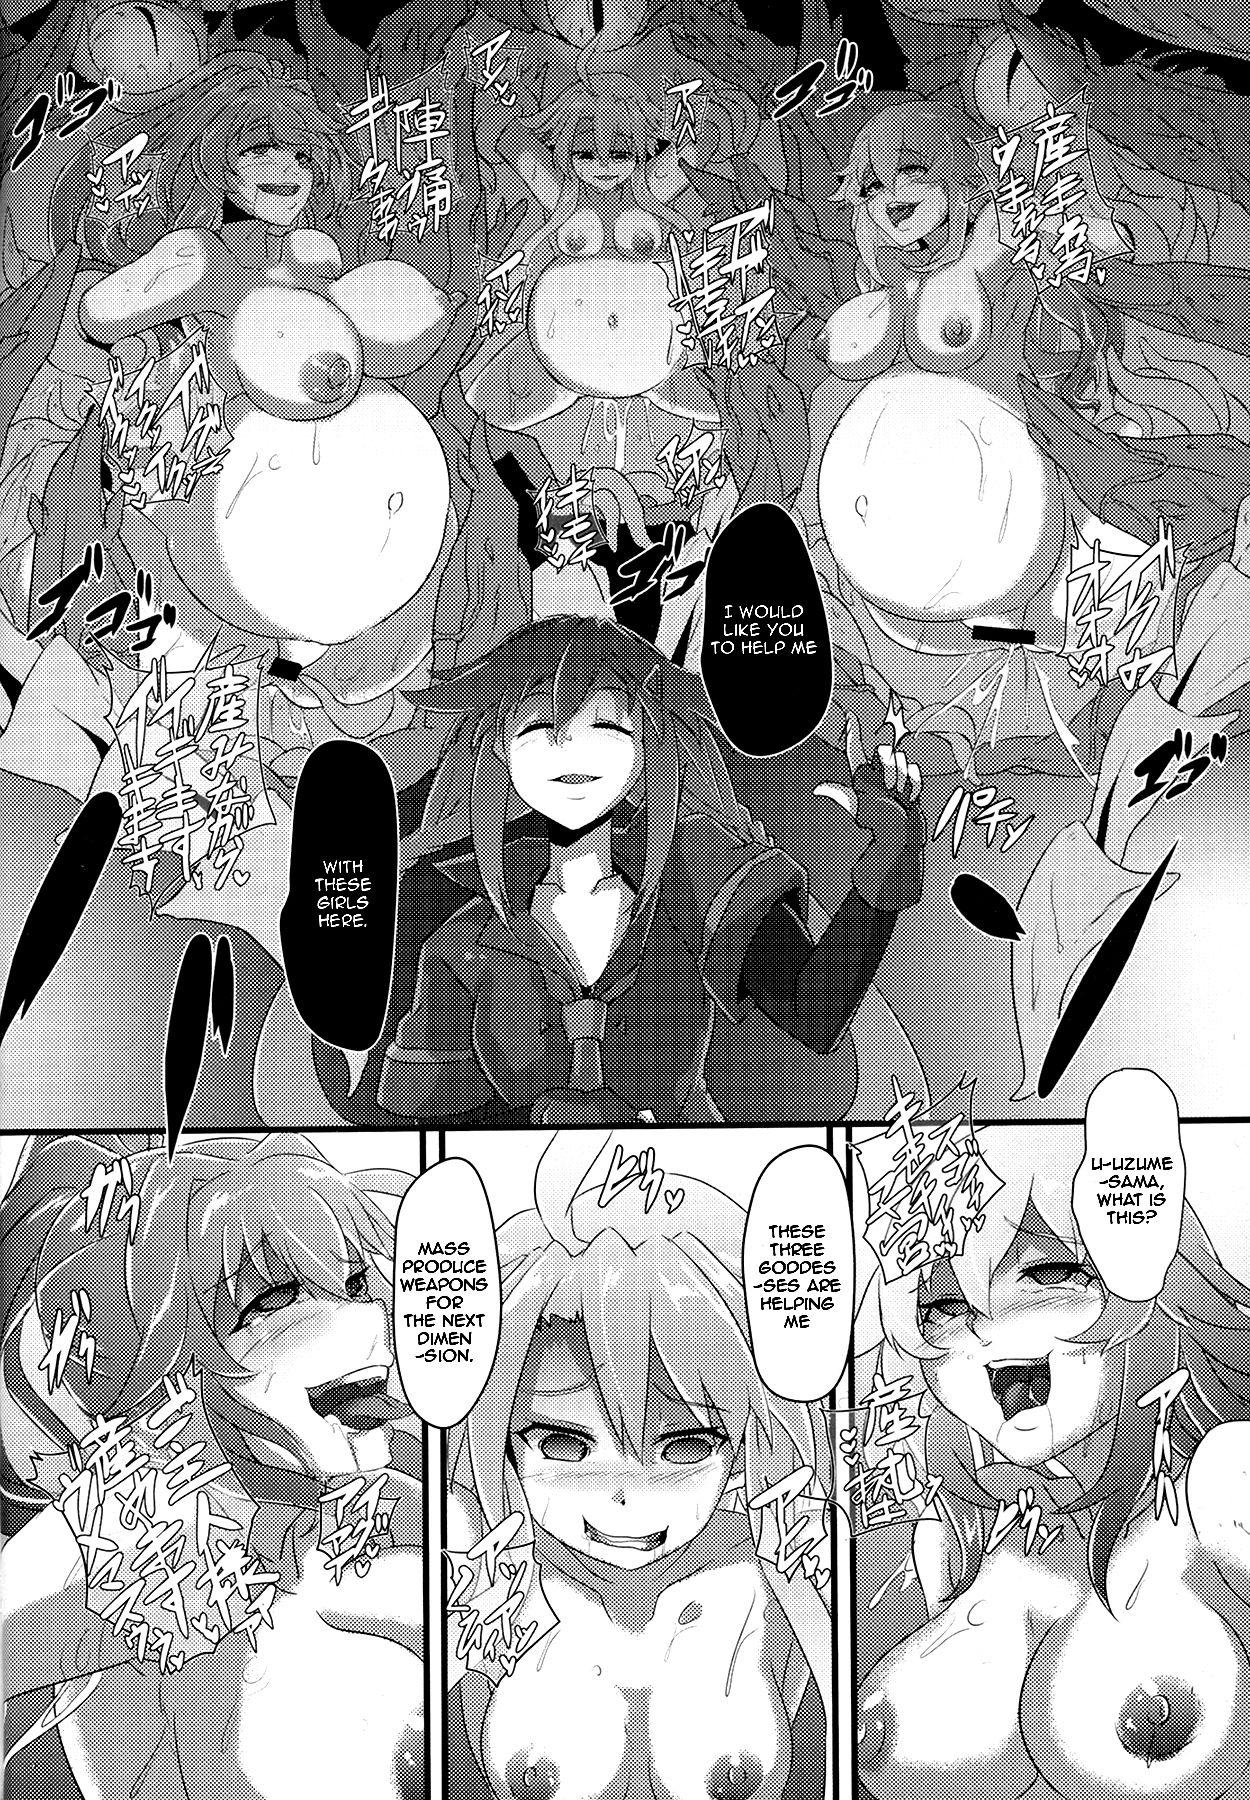 Asians After the Nightmare - Hyperdimension neptunia Facials - Page 6